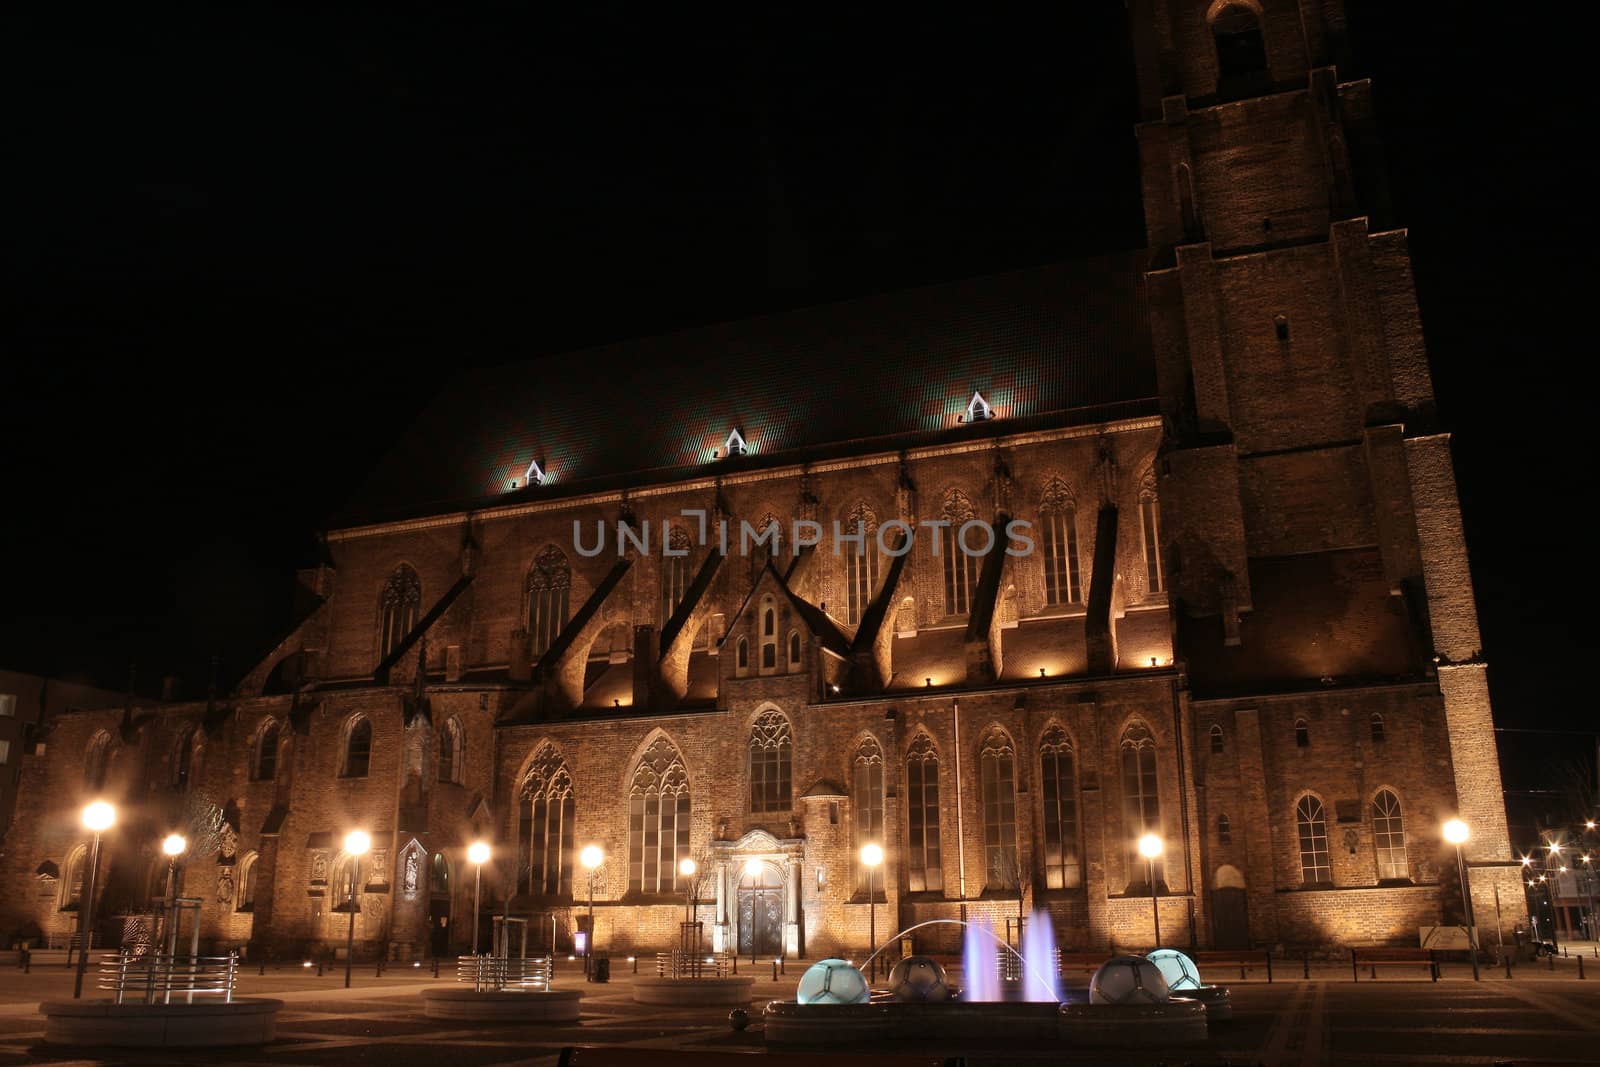 Church and the fountain at night, Wroclaw, Poland